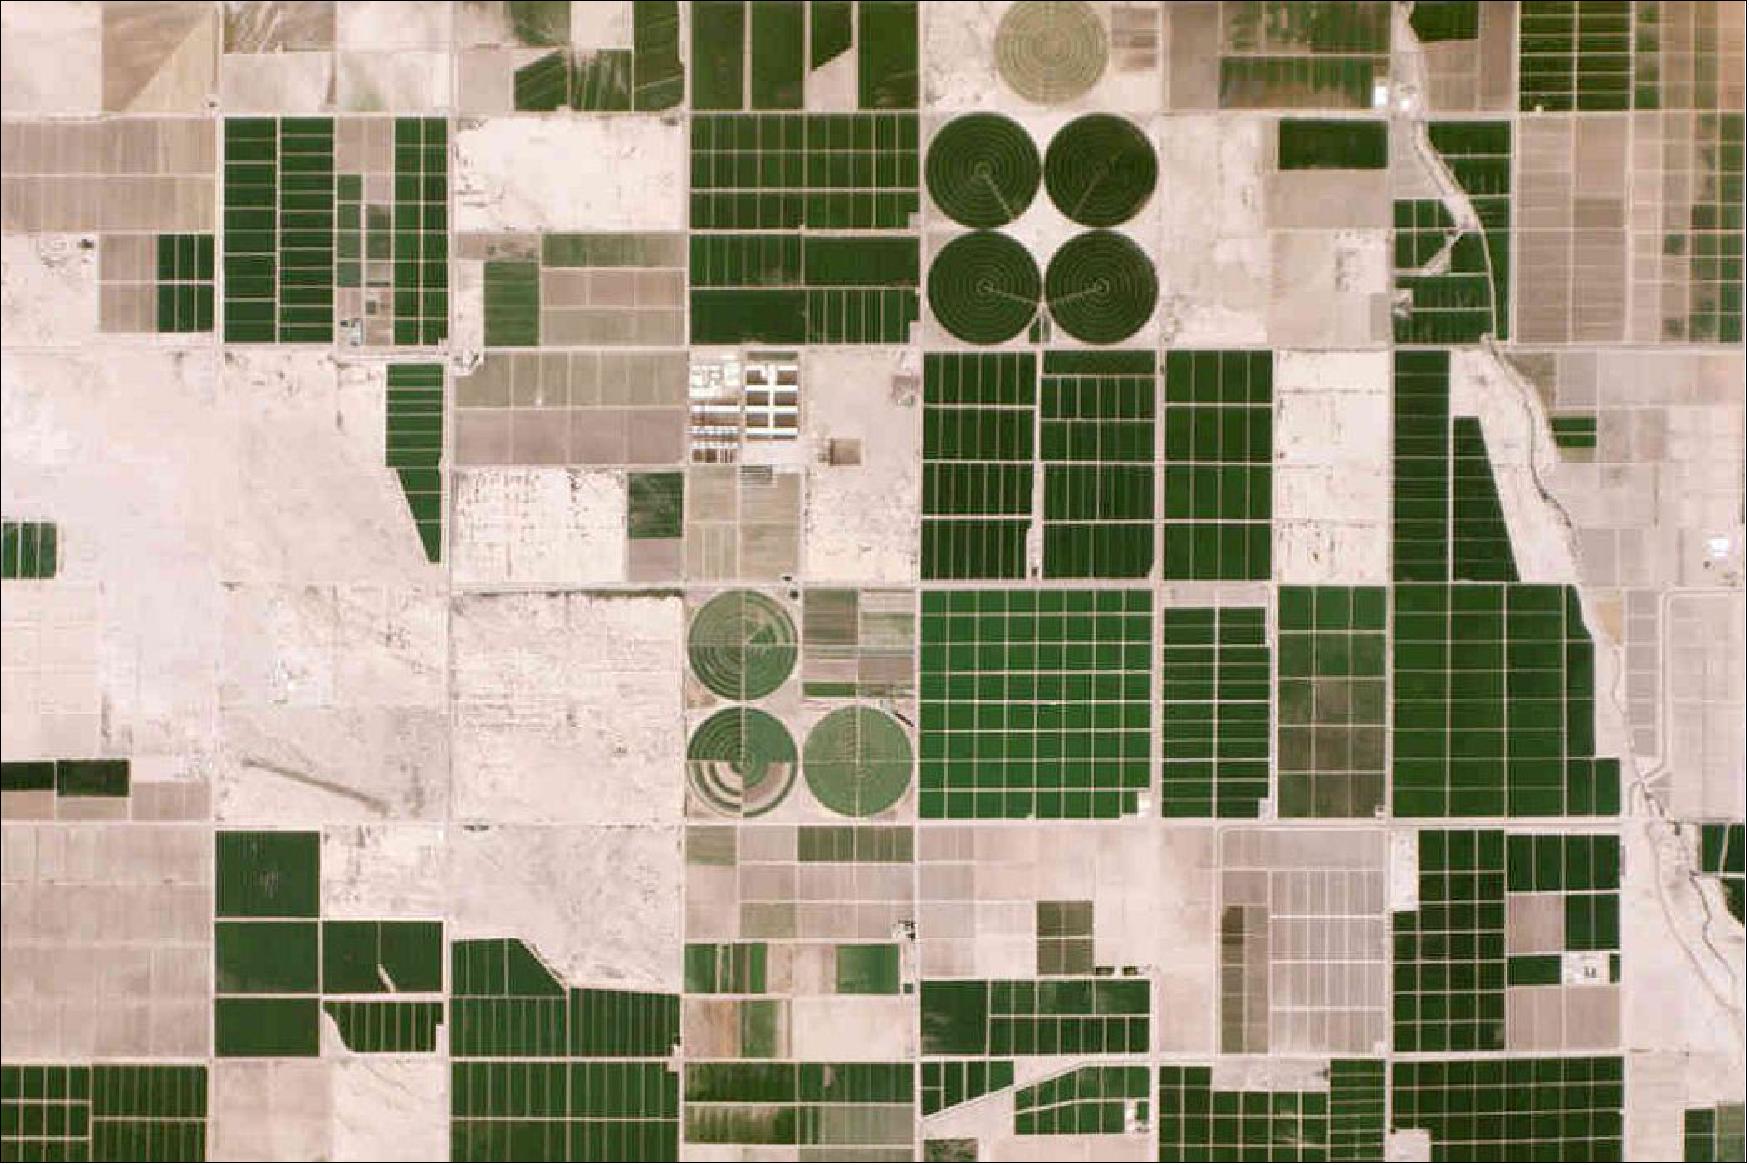 Figure 49: Irrigated fields in Pinal County, Arizona captured by Flock 1 nanosatellites in August 2014 (image credit: Planet Labs) 87)